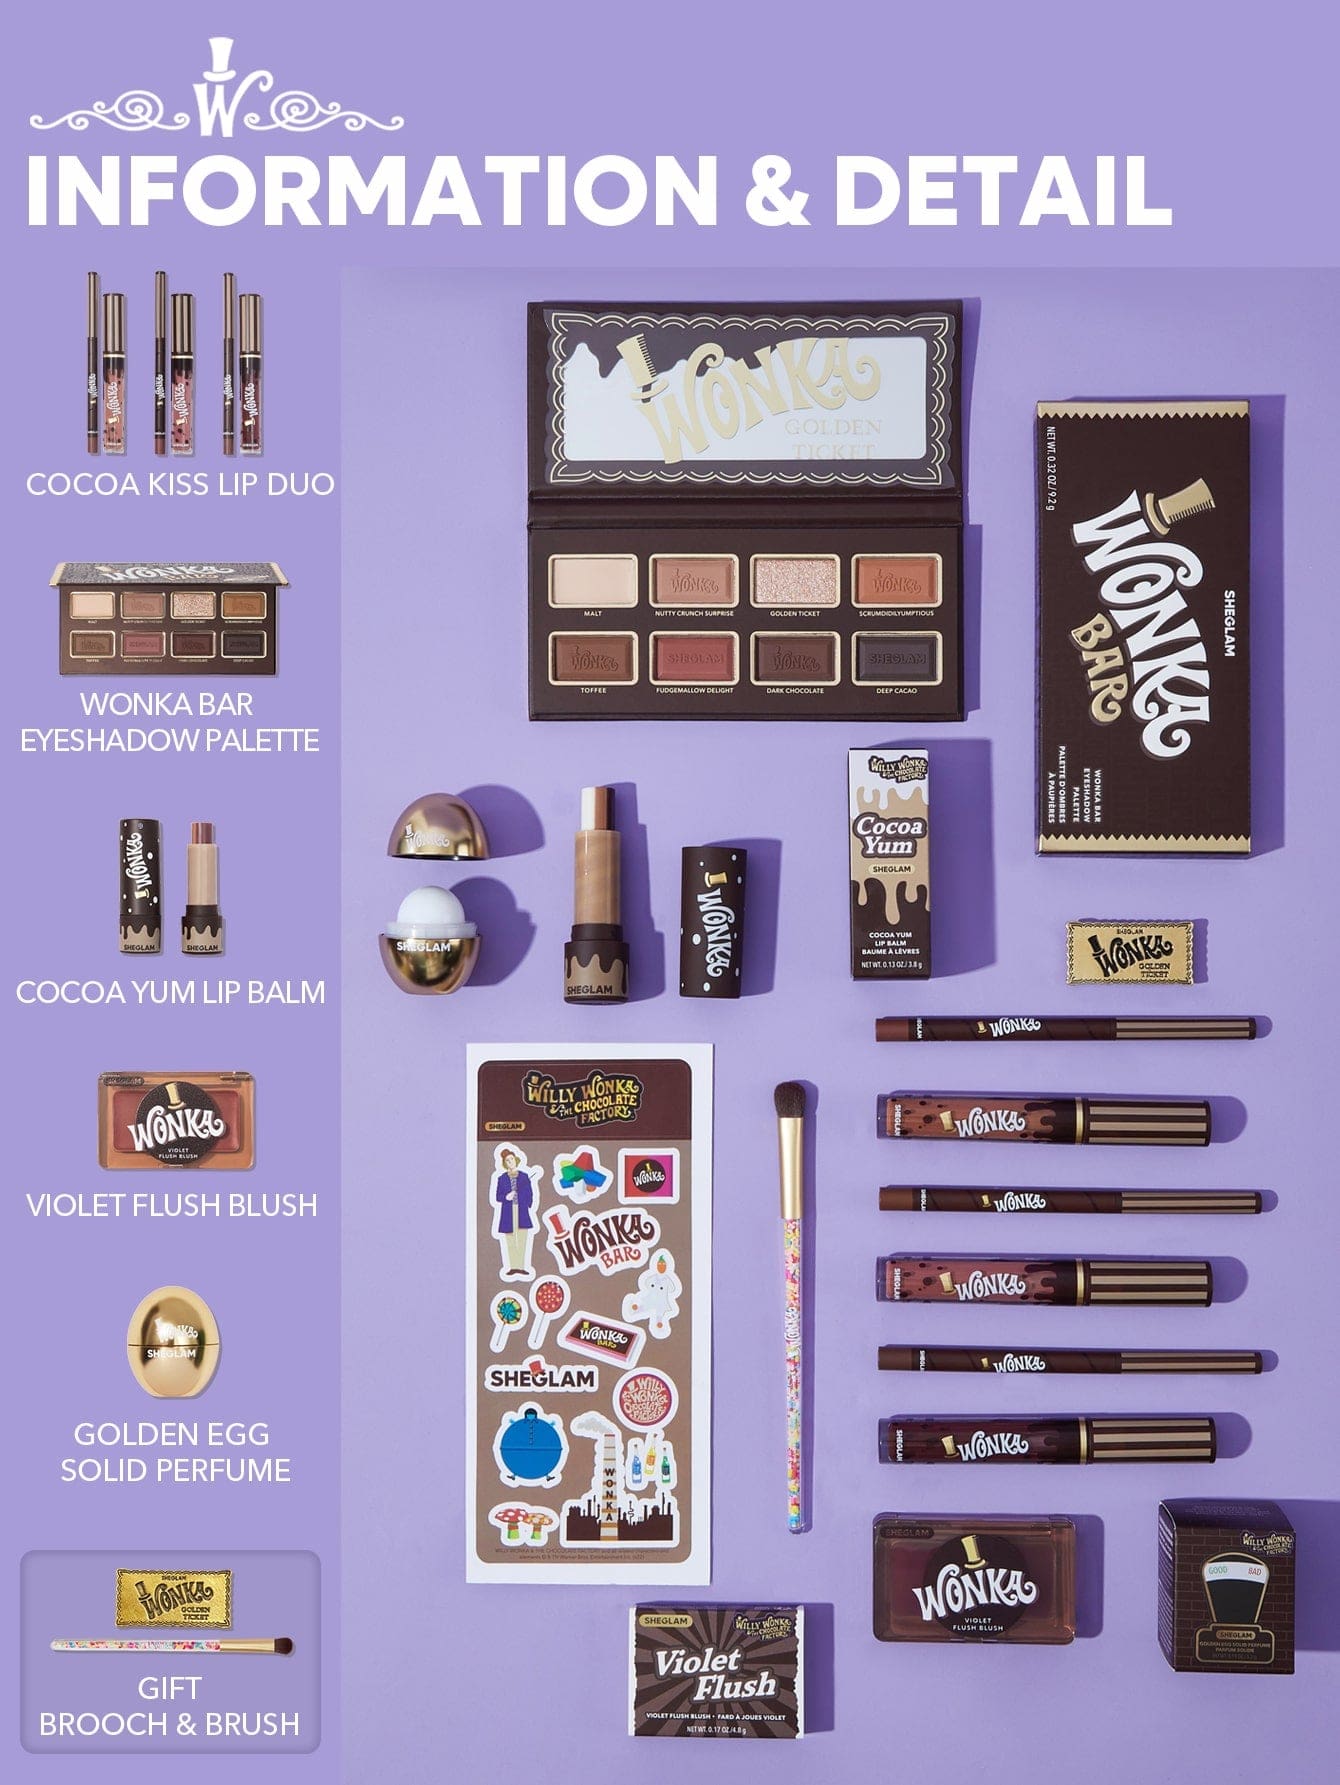 | Willy wonka Full Collection Set